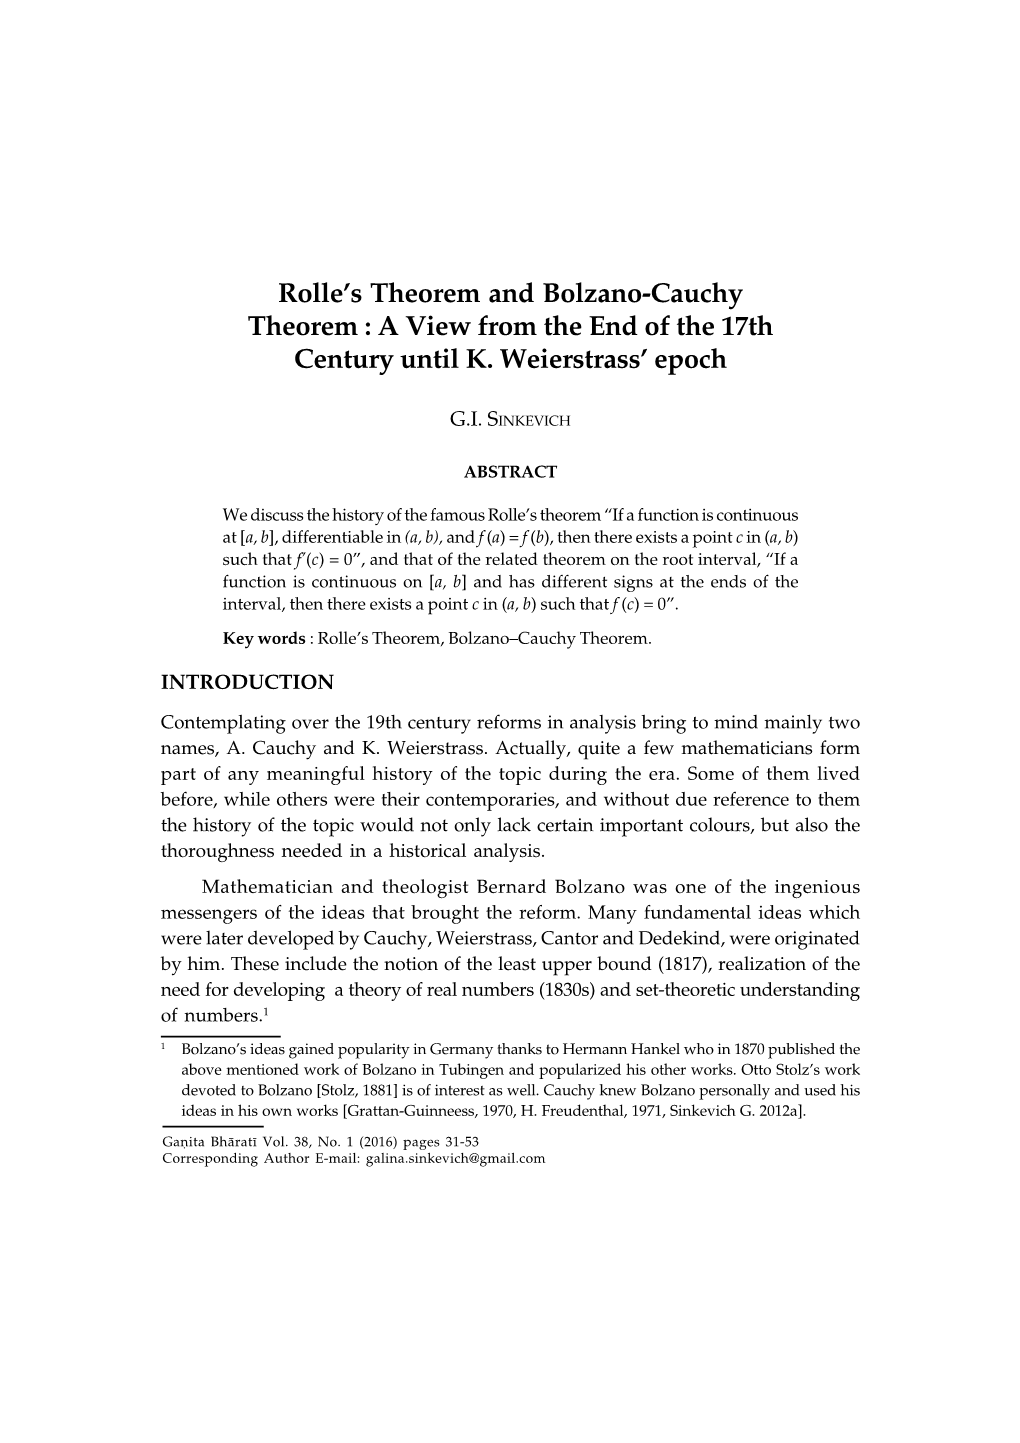 Rolle's Theorem and Bolzano-Cauchy Theorem : a View